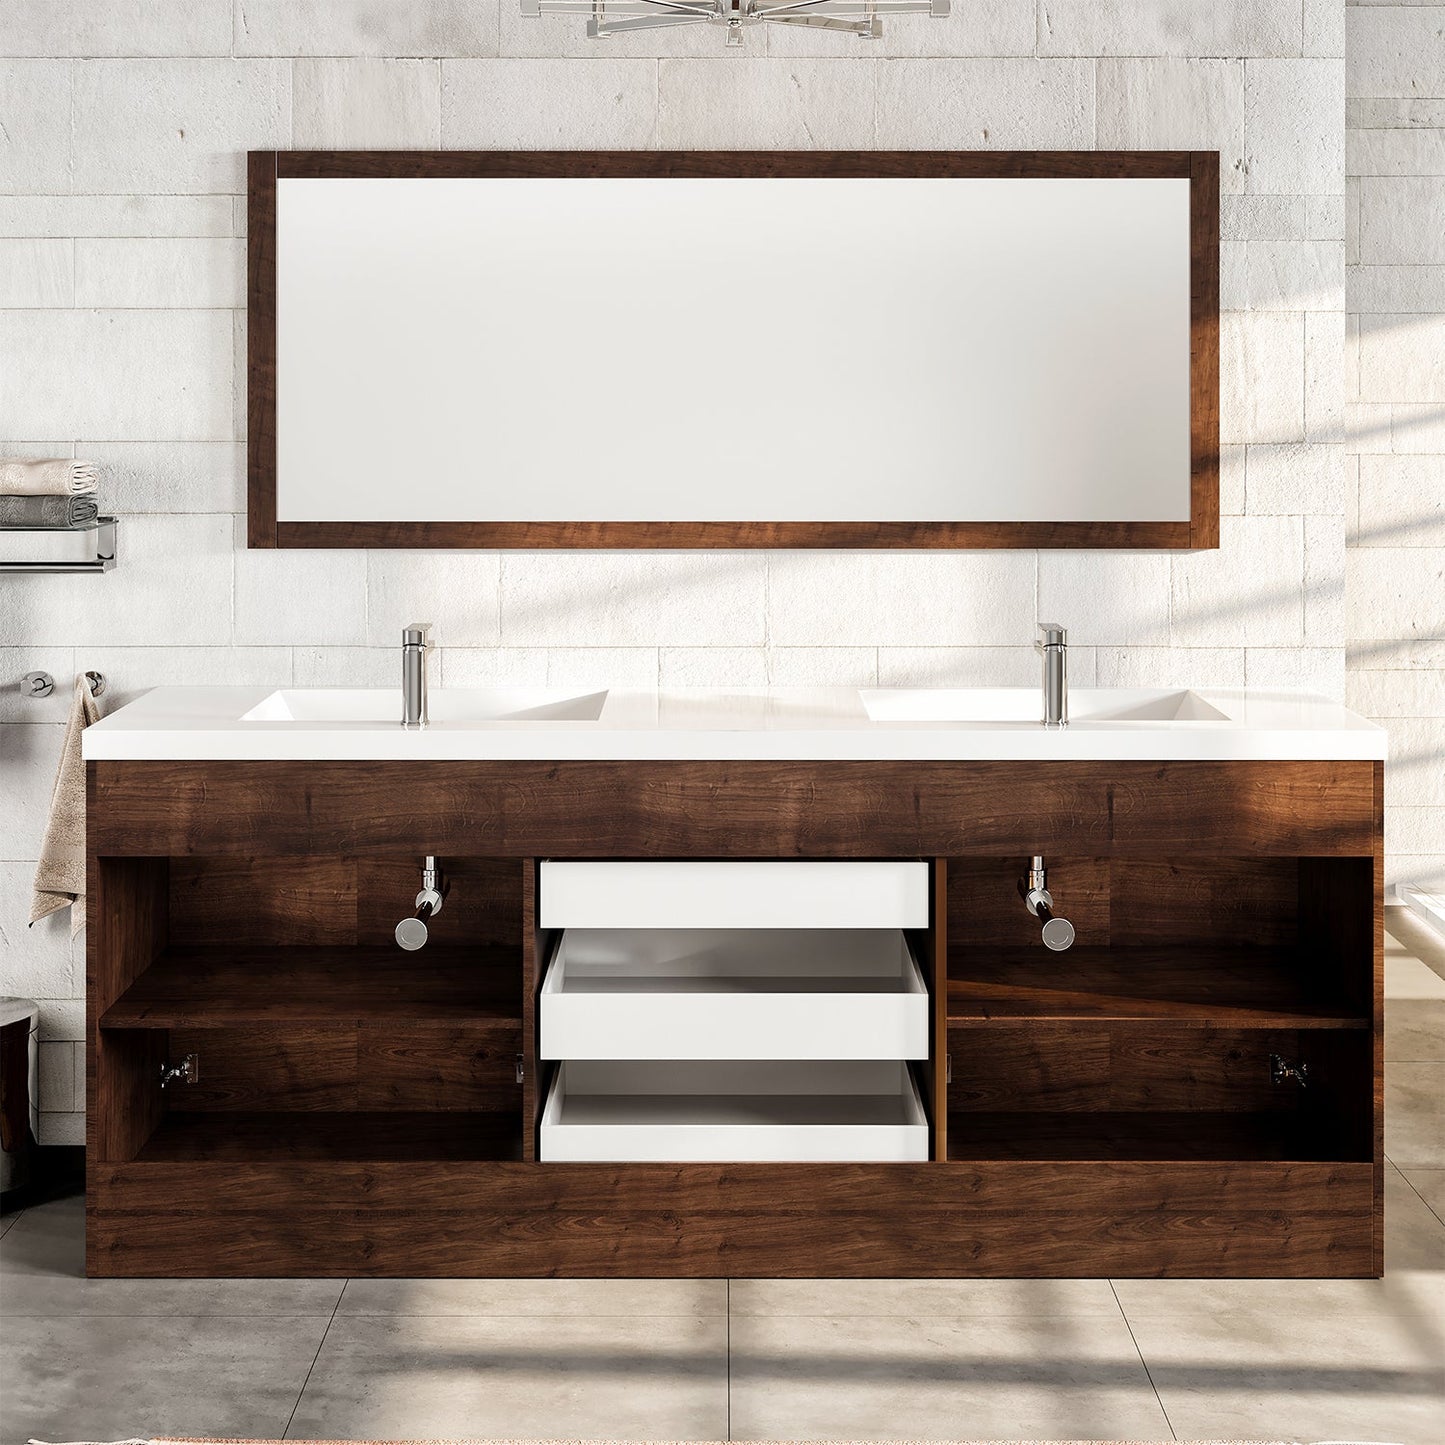 Lugano 84"W x 20" D Rosewood Double Sink Bathroom Vanity with Acrylic Countertop and Integrated Sink